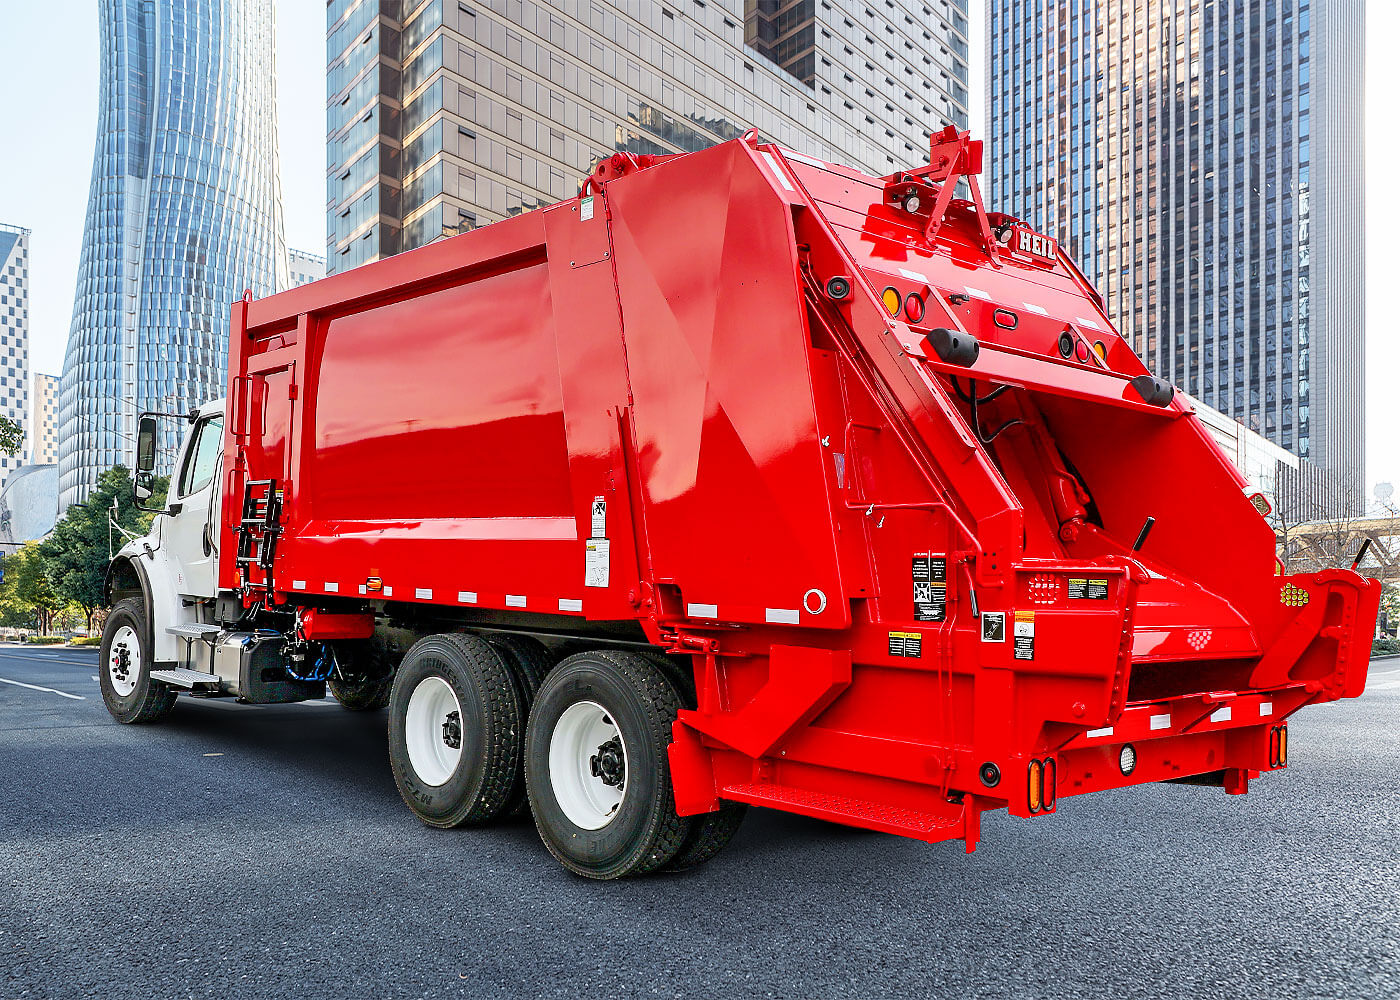 Durapack 5000 rear load garbage trucks manufactured by Heil